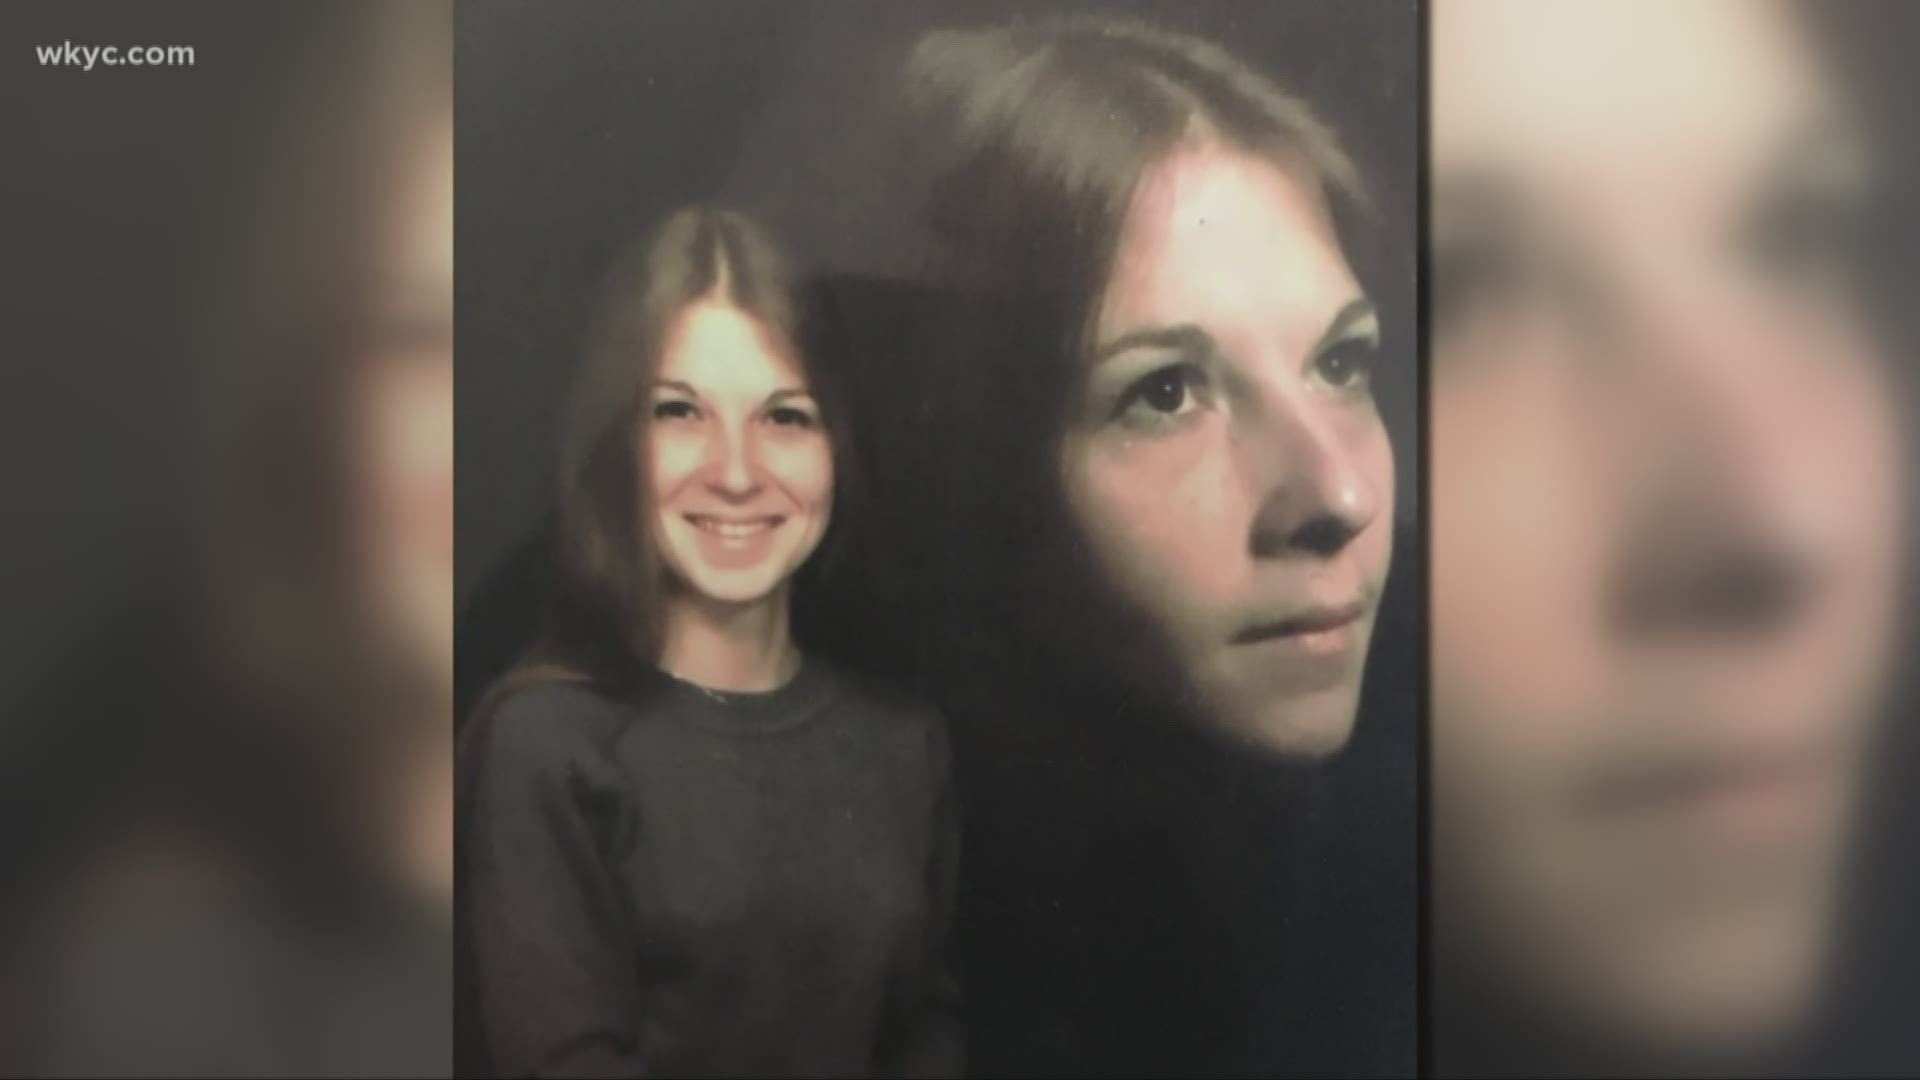 It’s been almost 22 years since Tonia Aldrich of Elyria was last seen. Andrew Horansky reports.